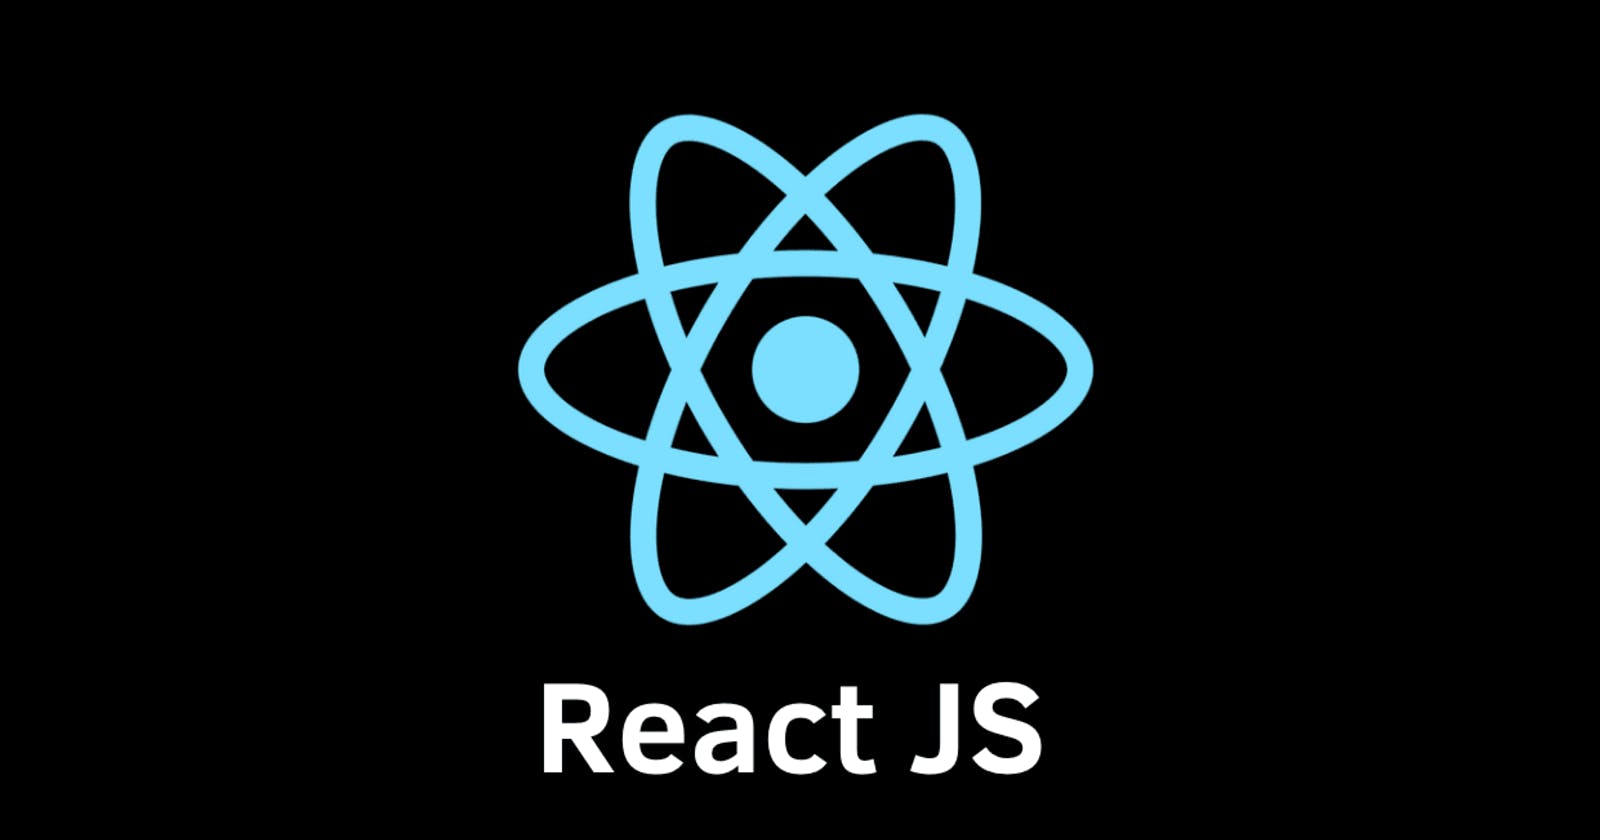 Let's Start With React js